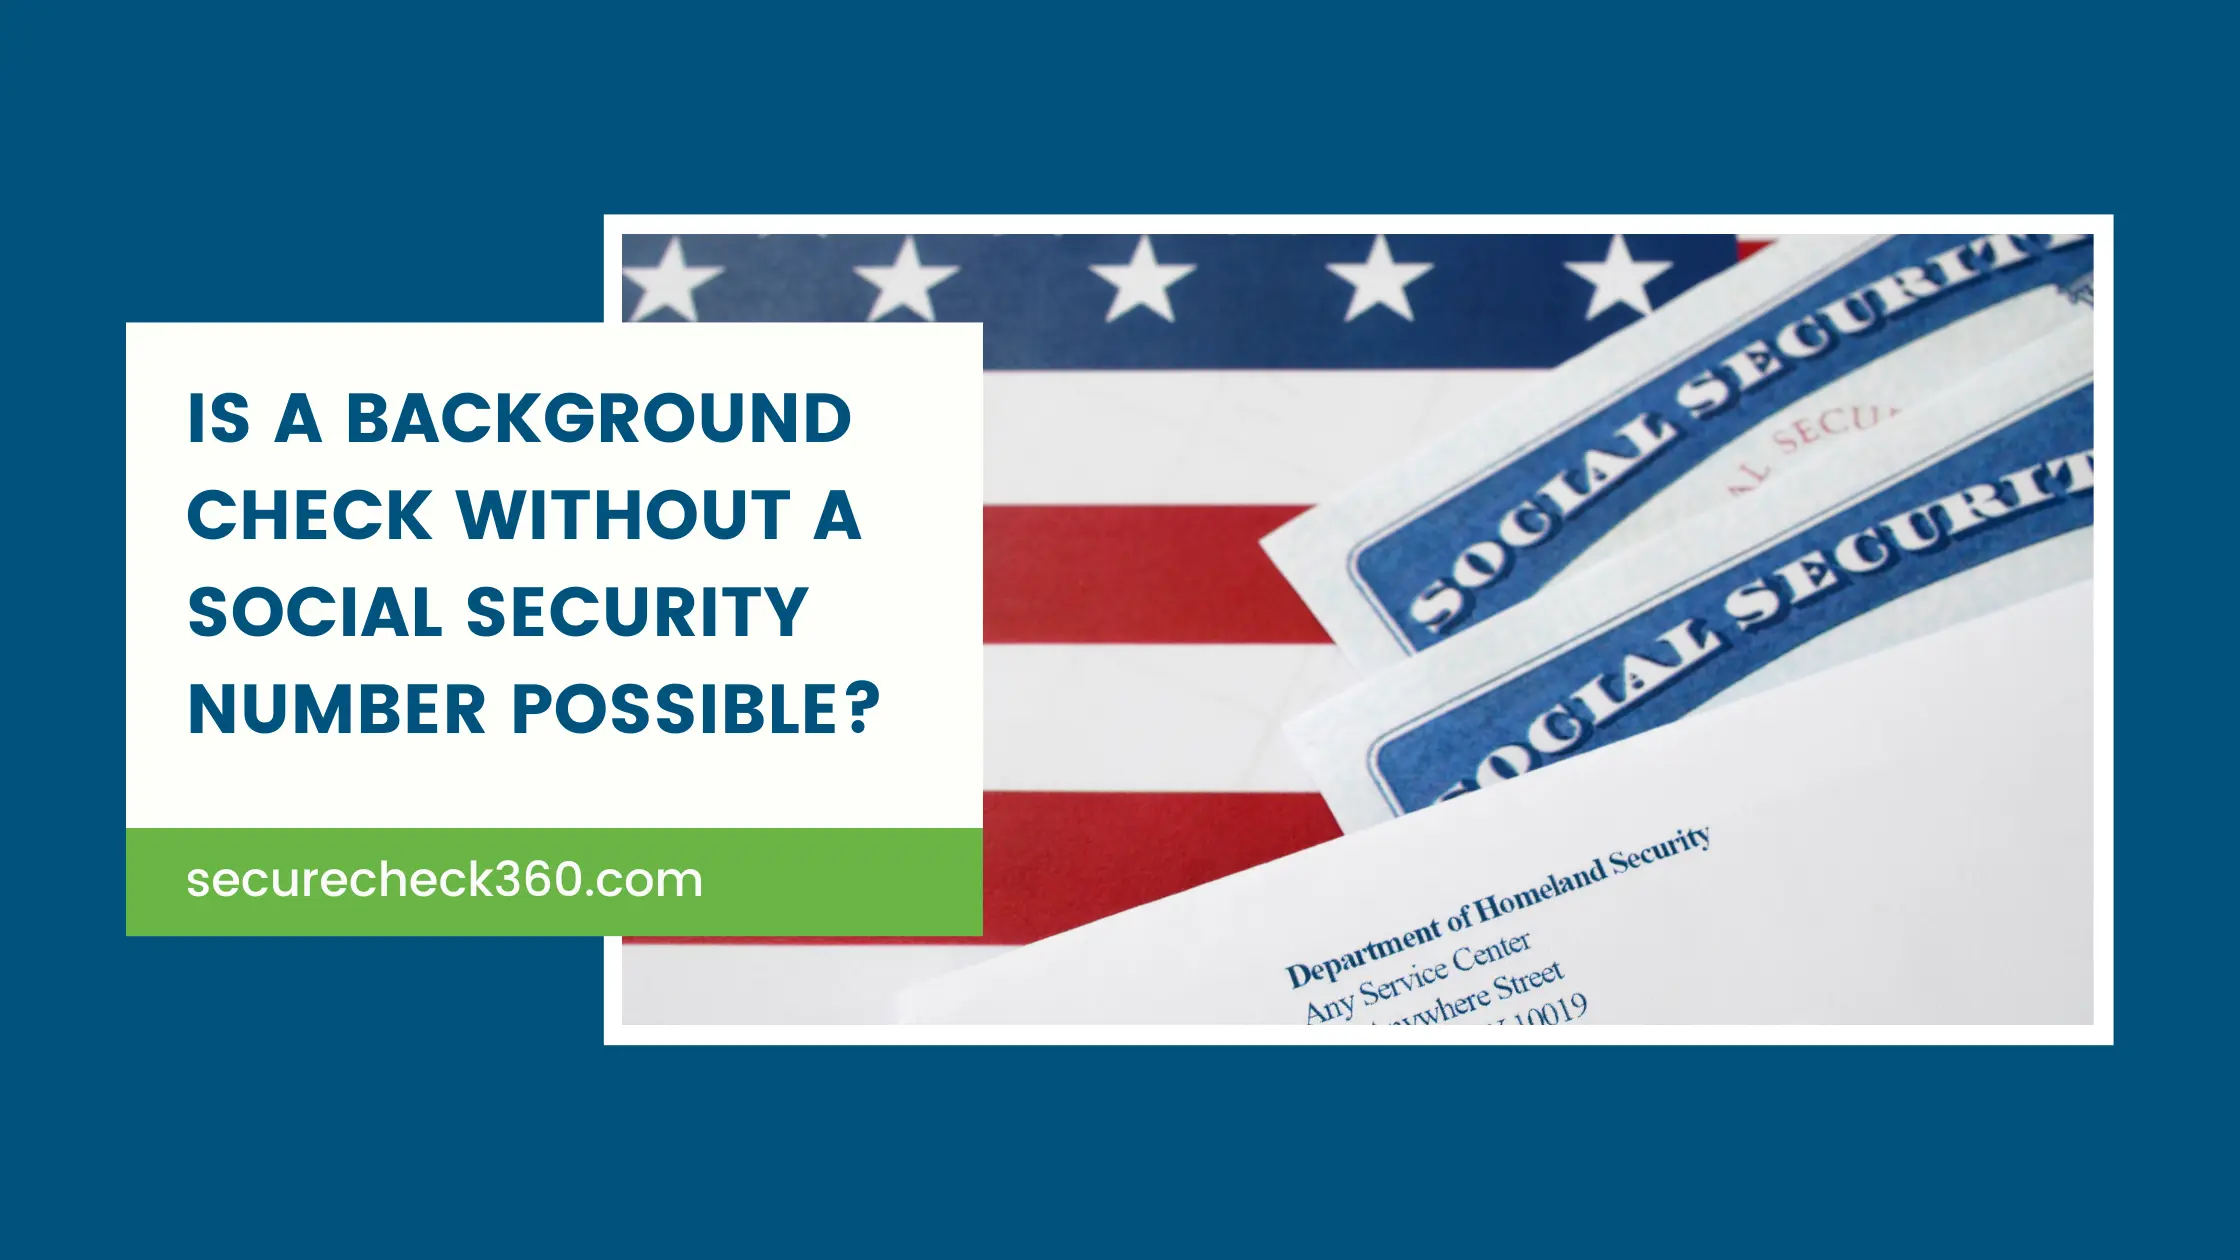 Is a background check without a social security number possible